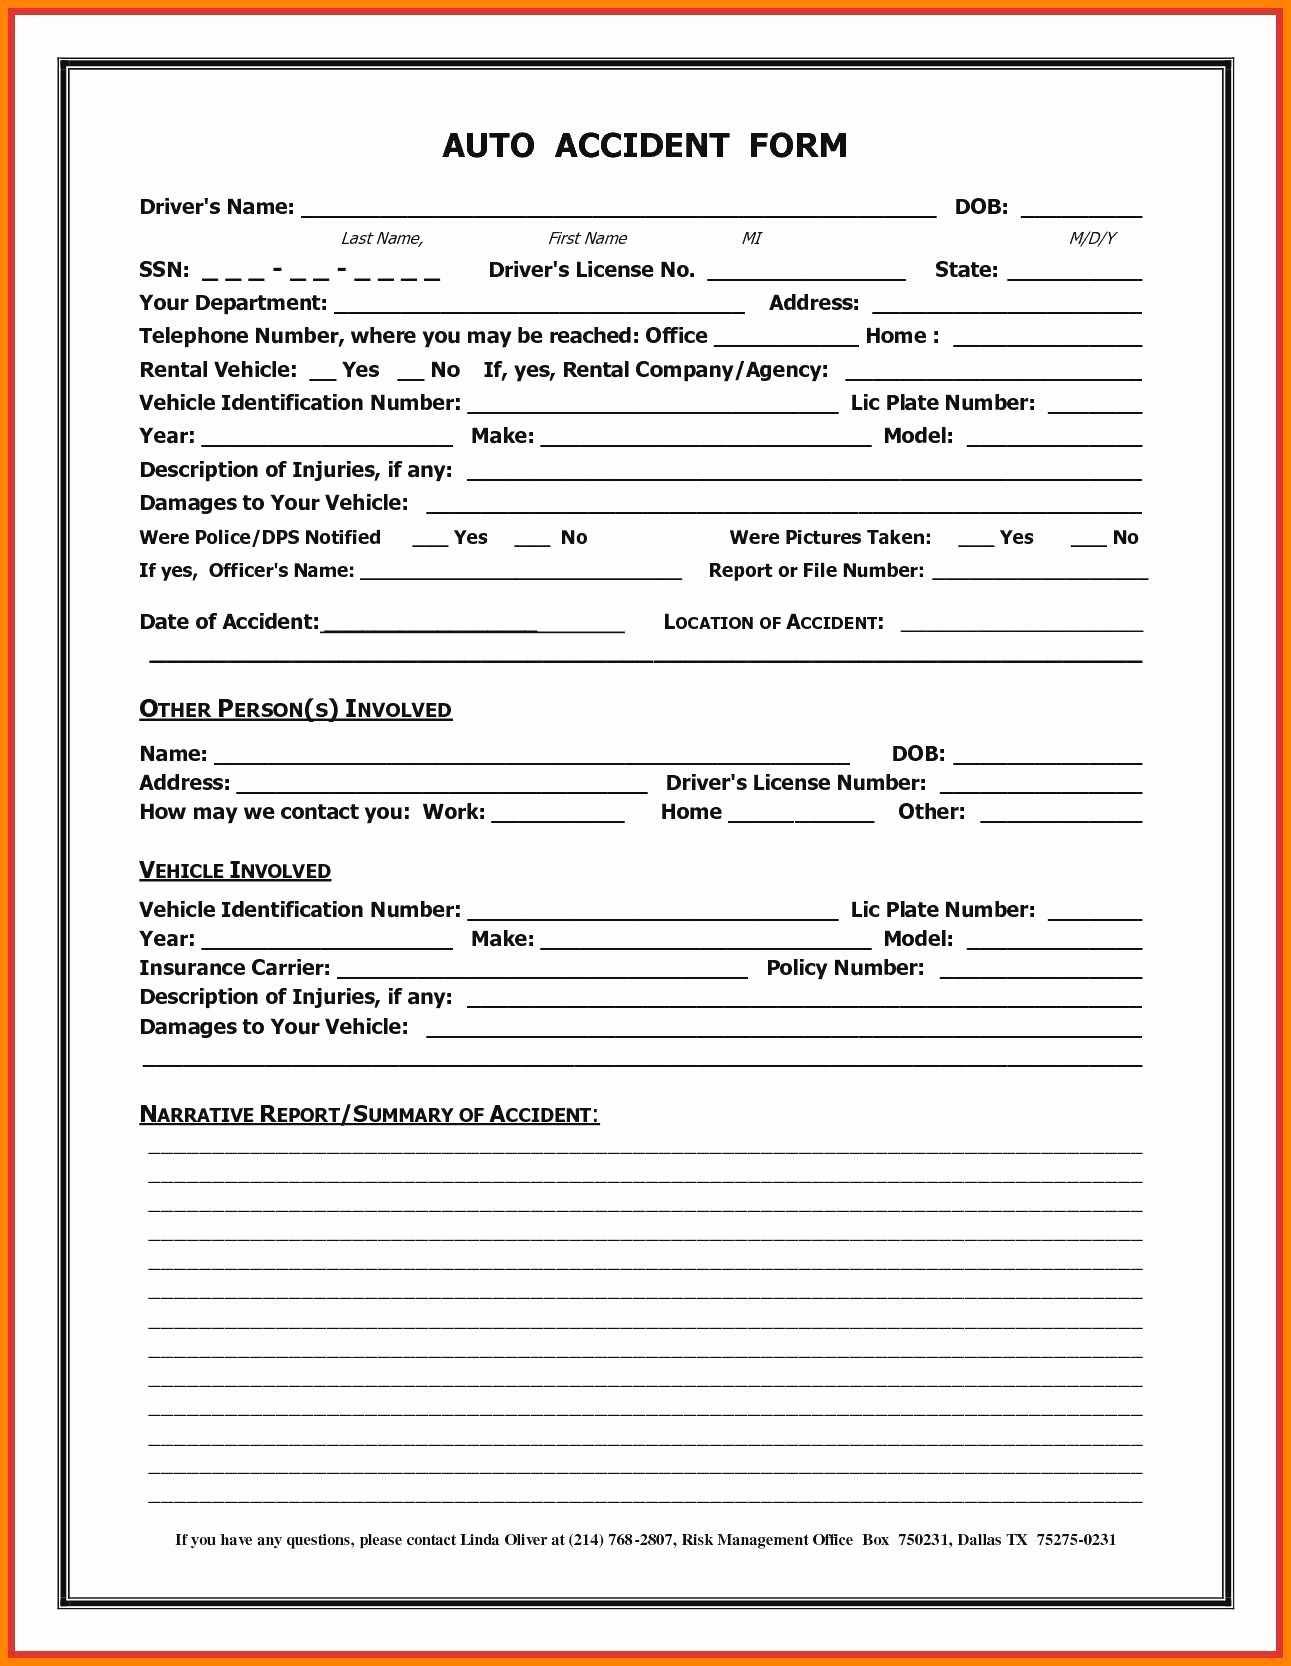 020 Free Car Accident Report Form Template Unbelievable With Regard To Vehicle Accident Report Template